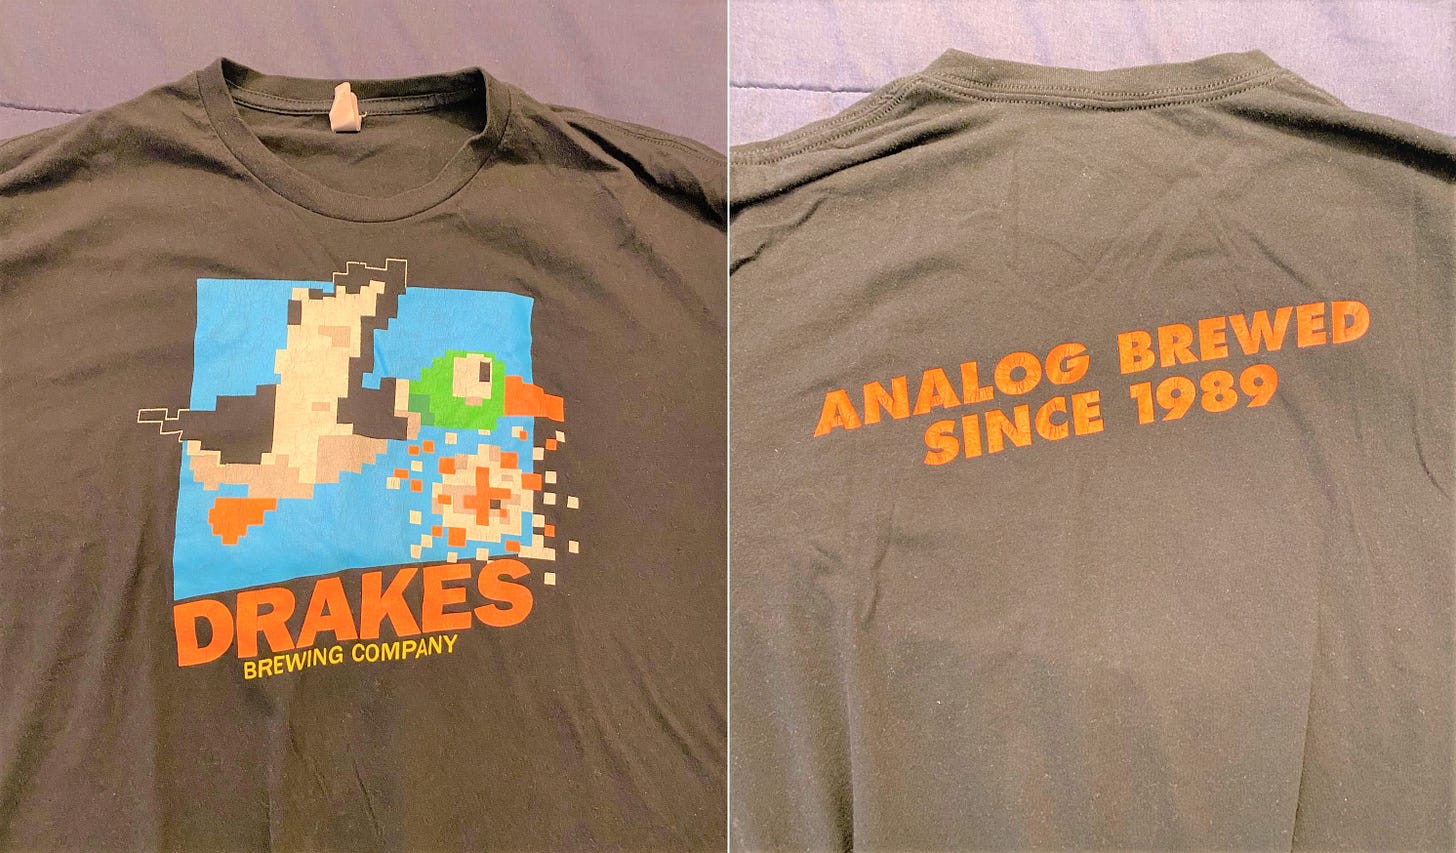 A t-shirt with an 8-bit duck and Drake's Brewing Company on the front, and the slogan "Analog Brewed since 1989" on the back